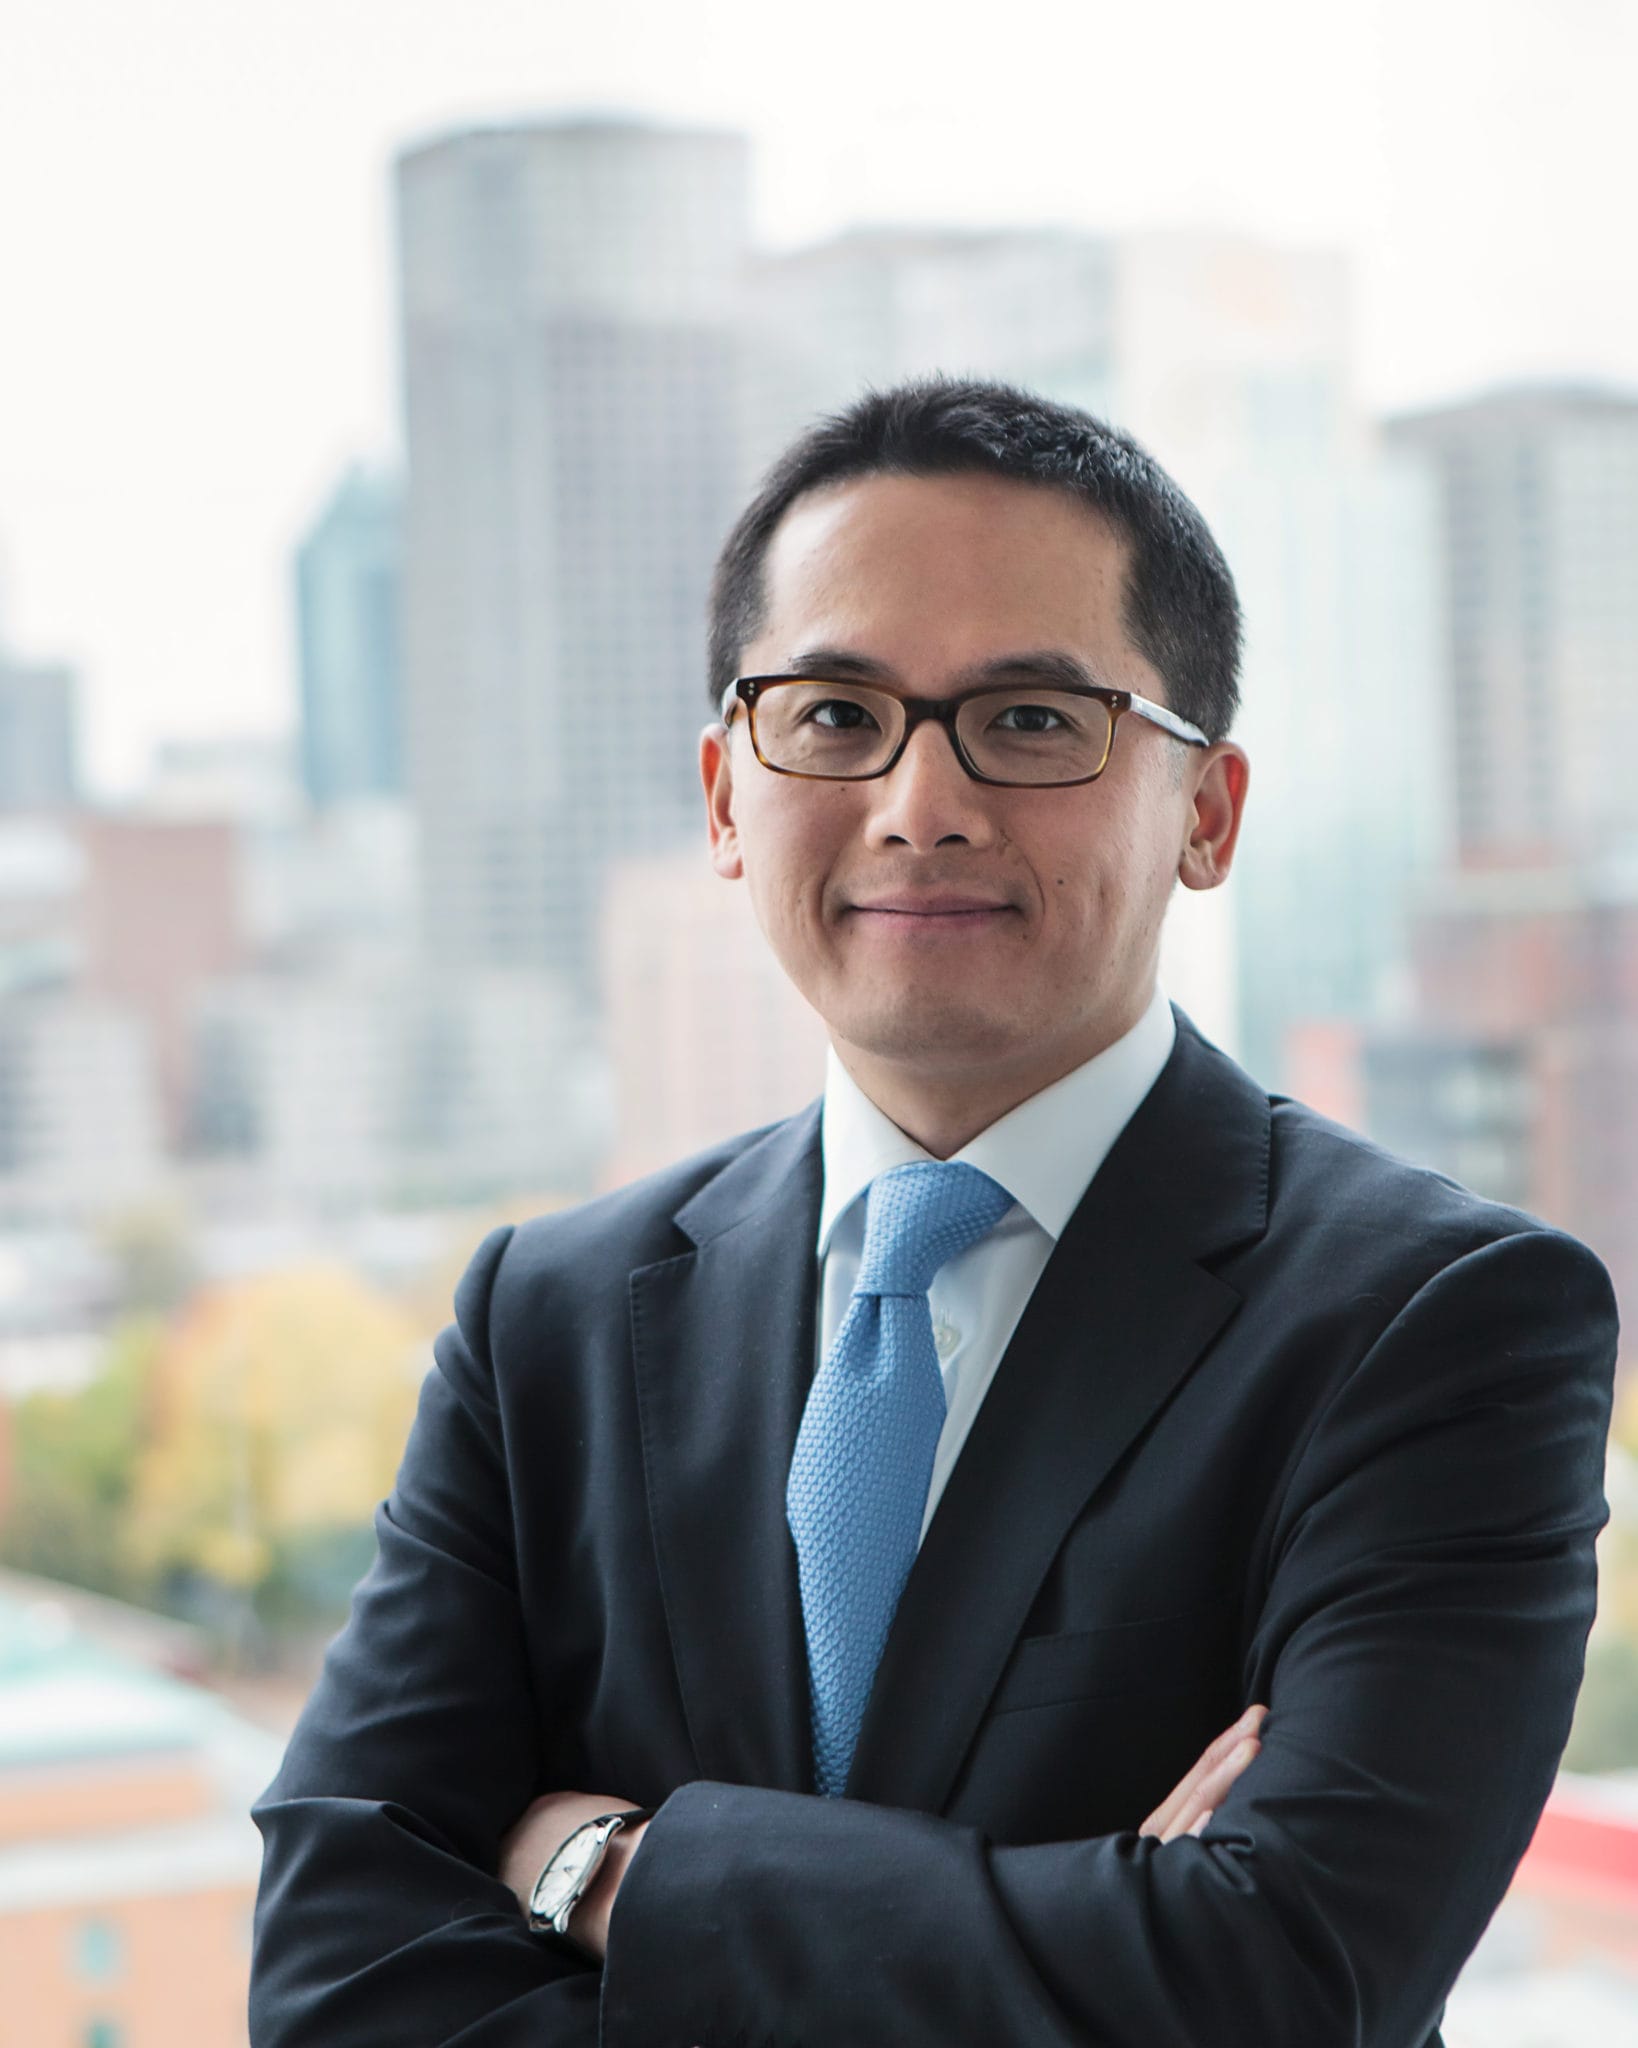 A professional asian man in a blue suit and glasses smiling at the camera with a city skyline in the background.